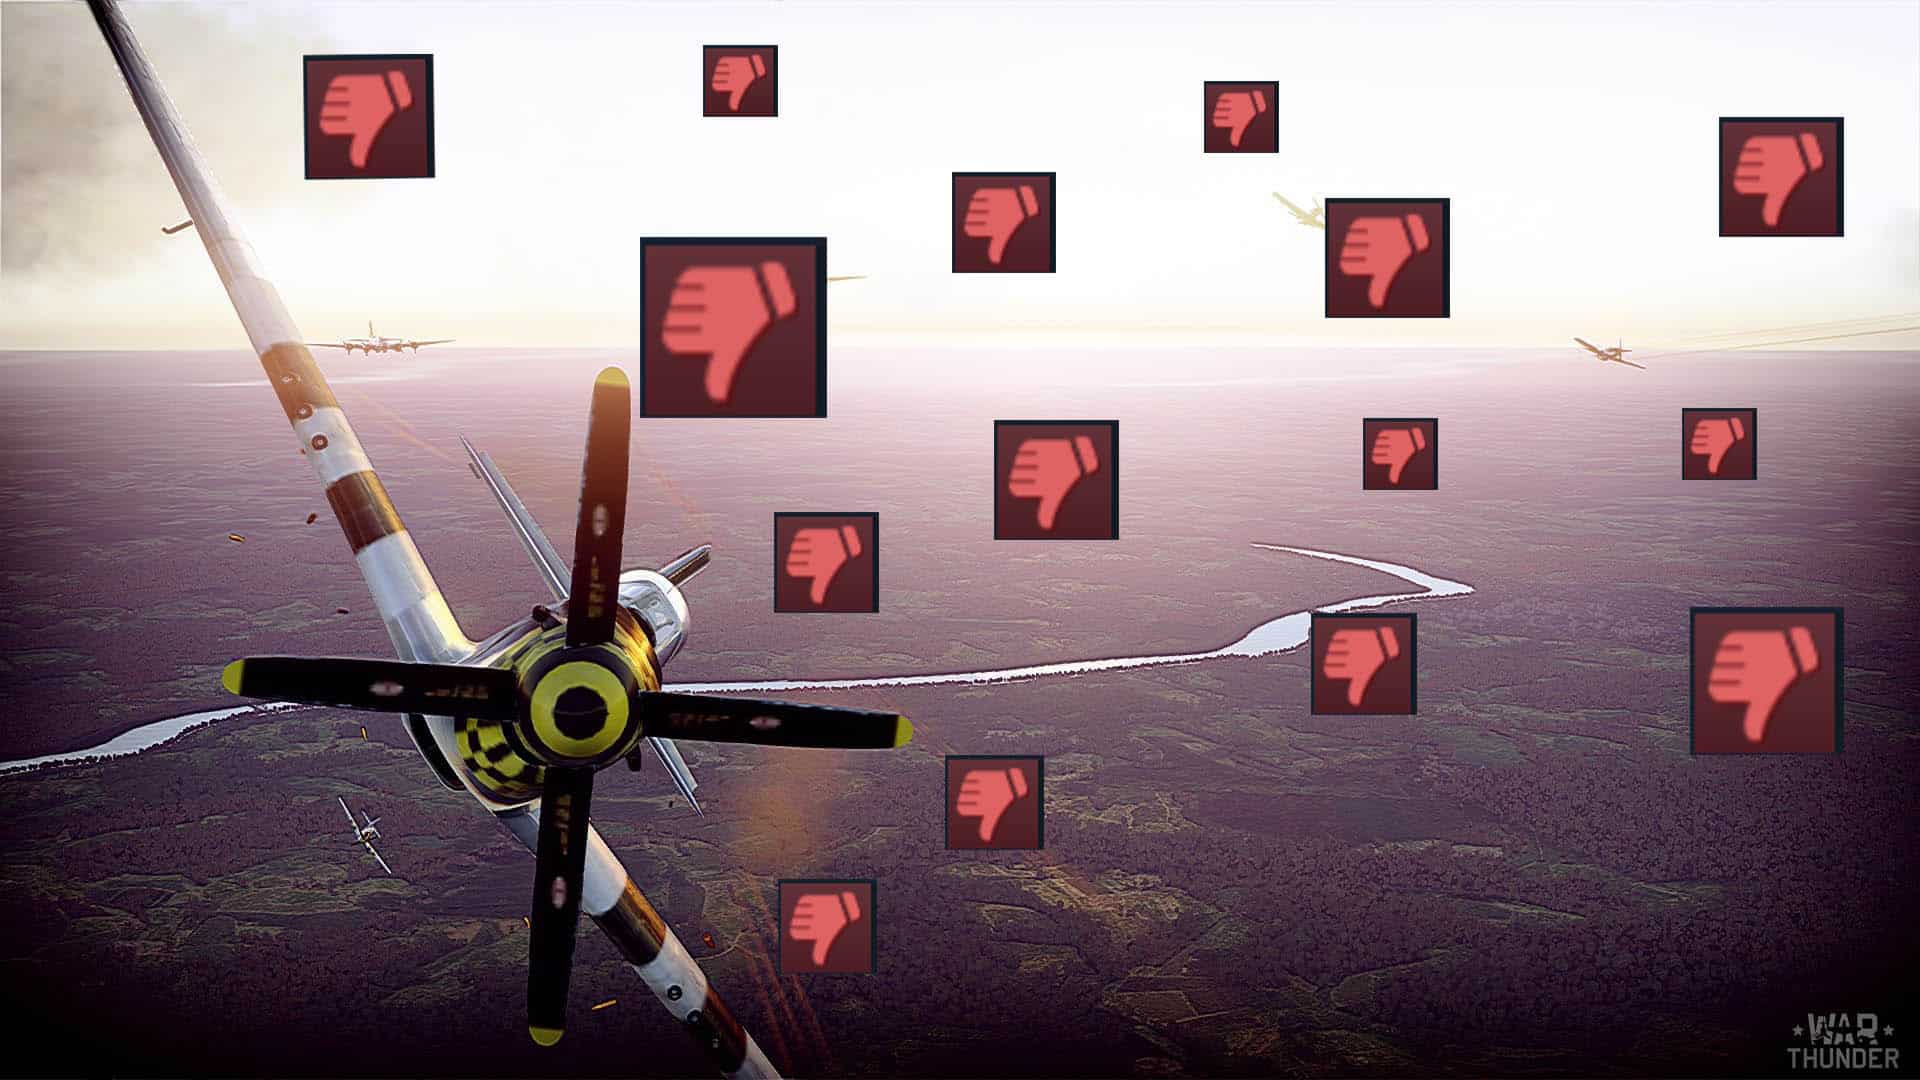 Steam hides recent War Thunder reviews amid economy scandal